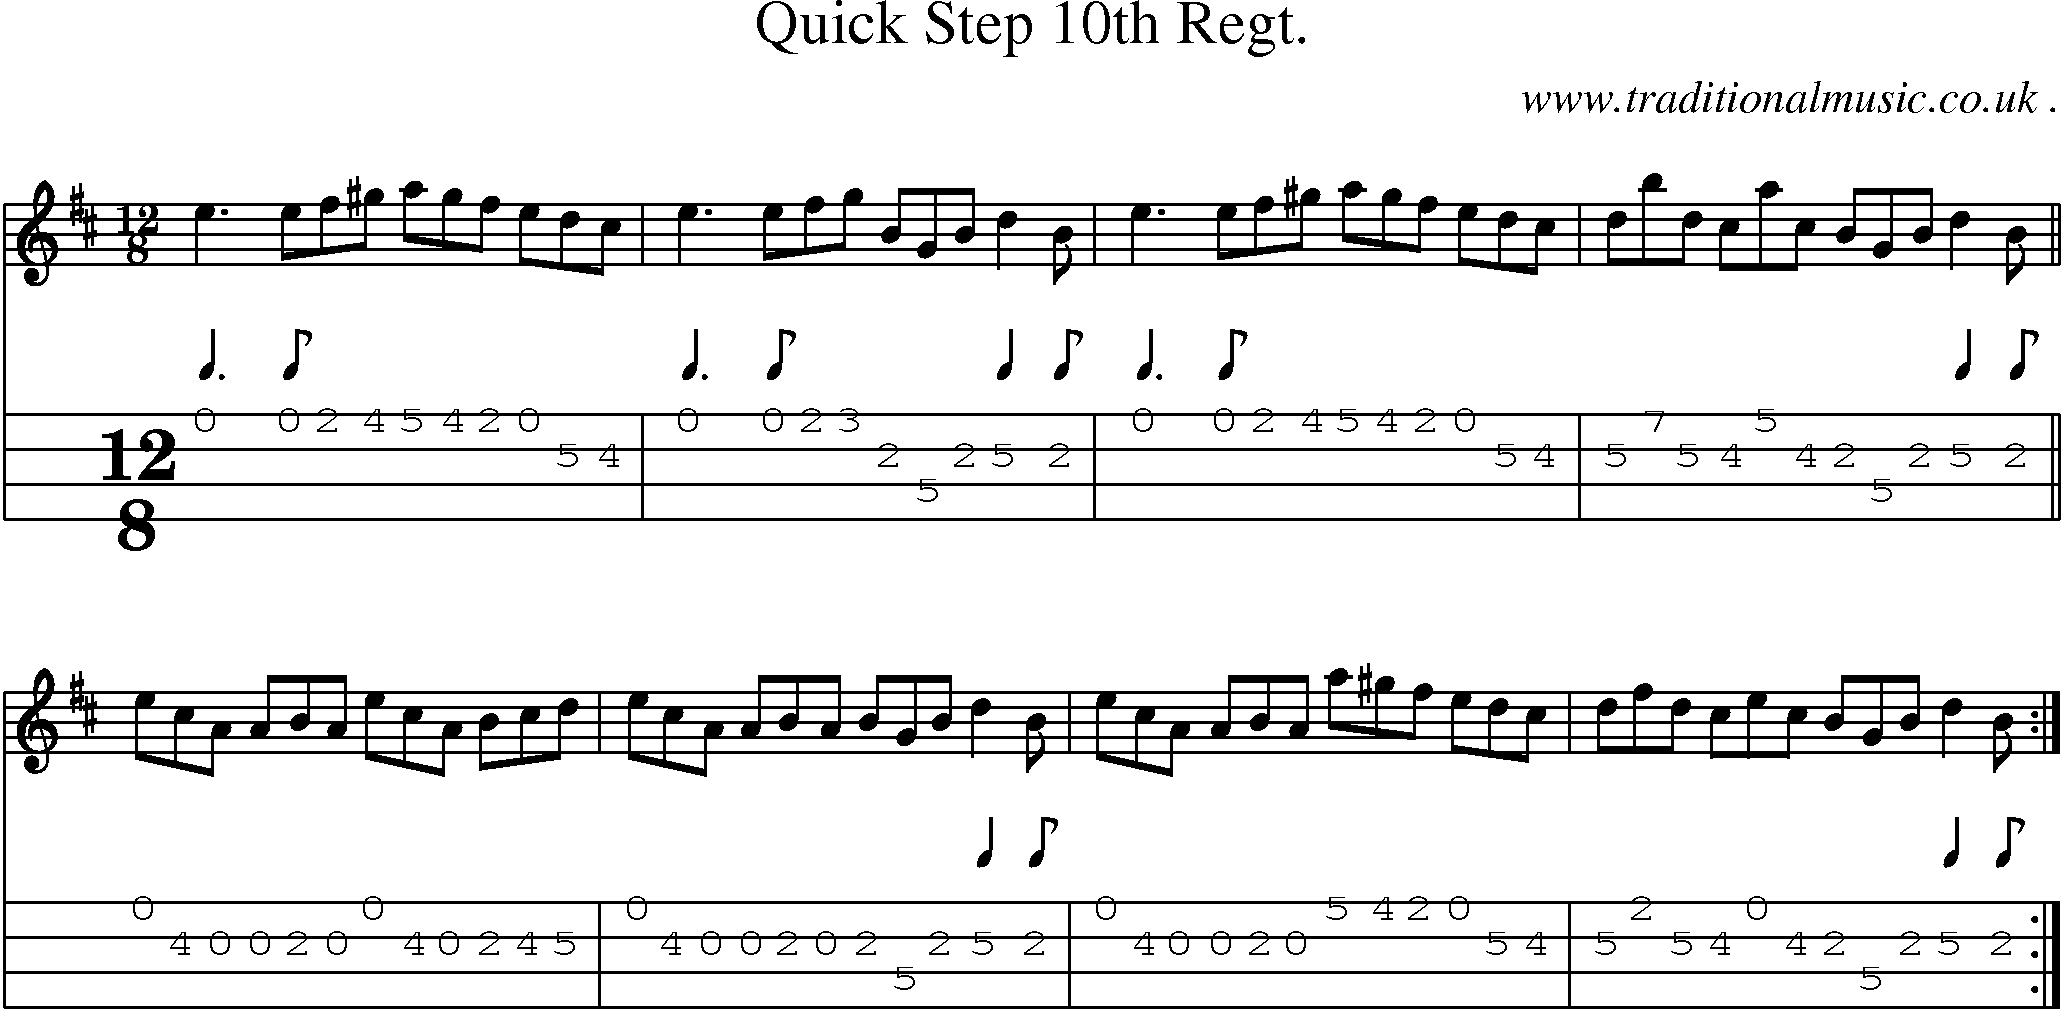 Sheet-music  score, Chords and Mandolin Tabs for Quick Step 10th Regt